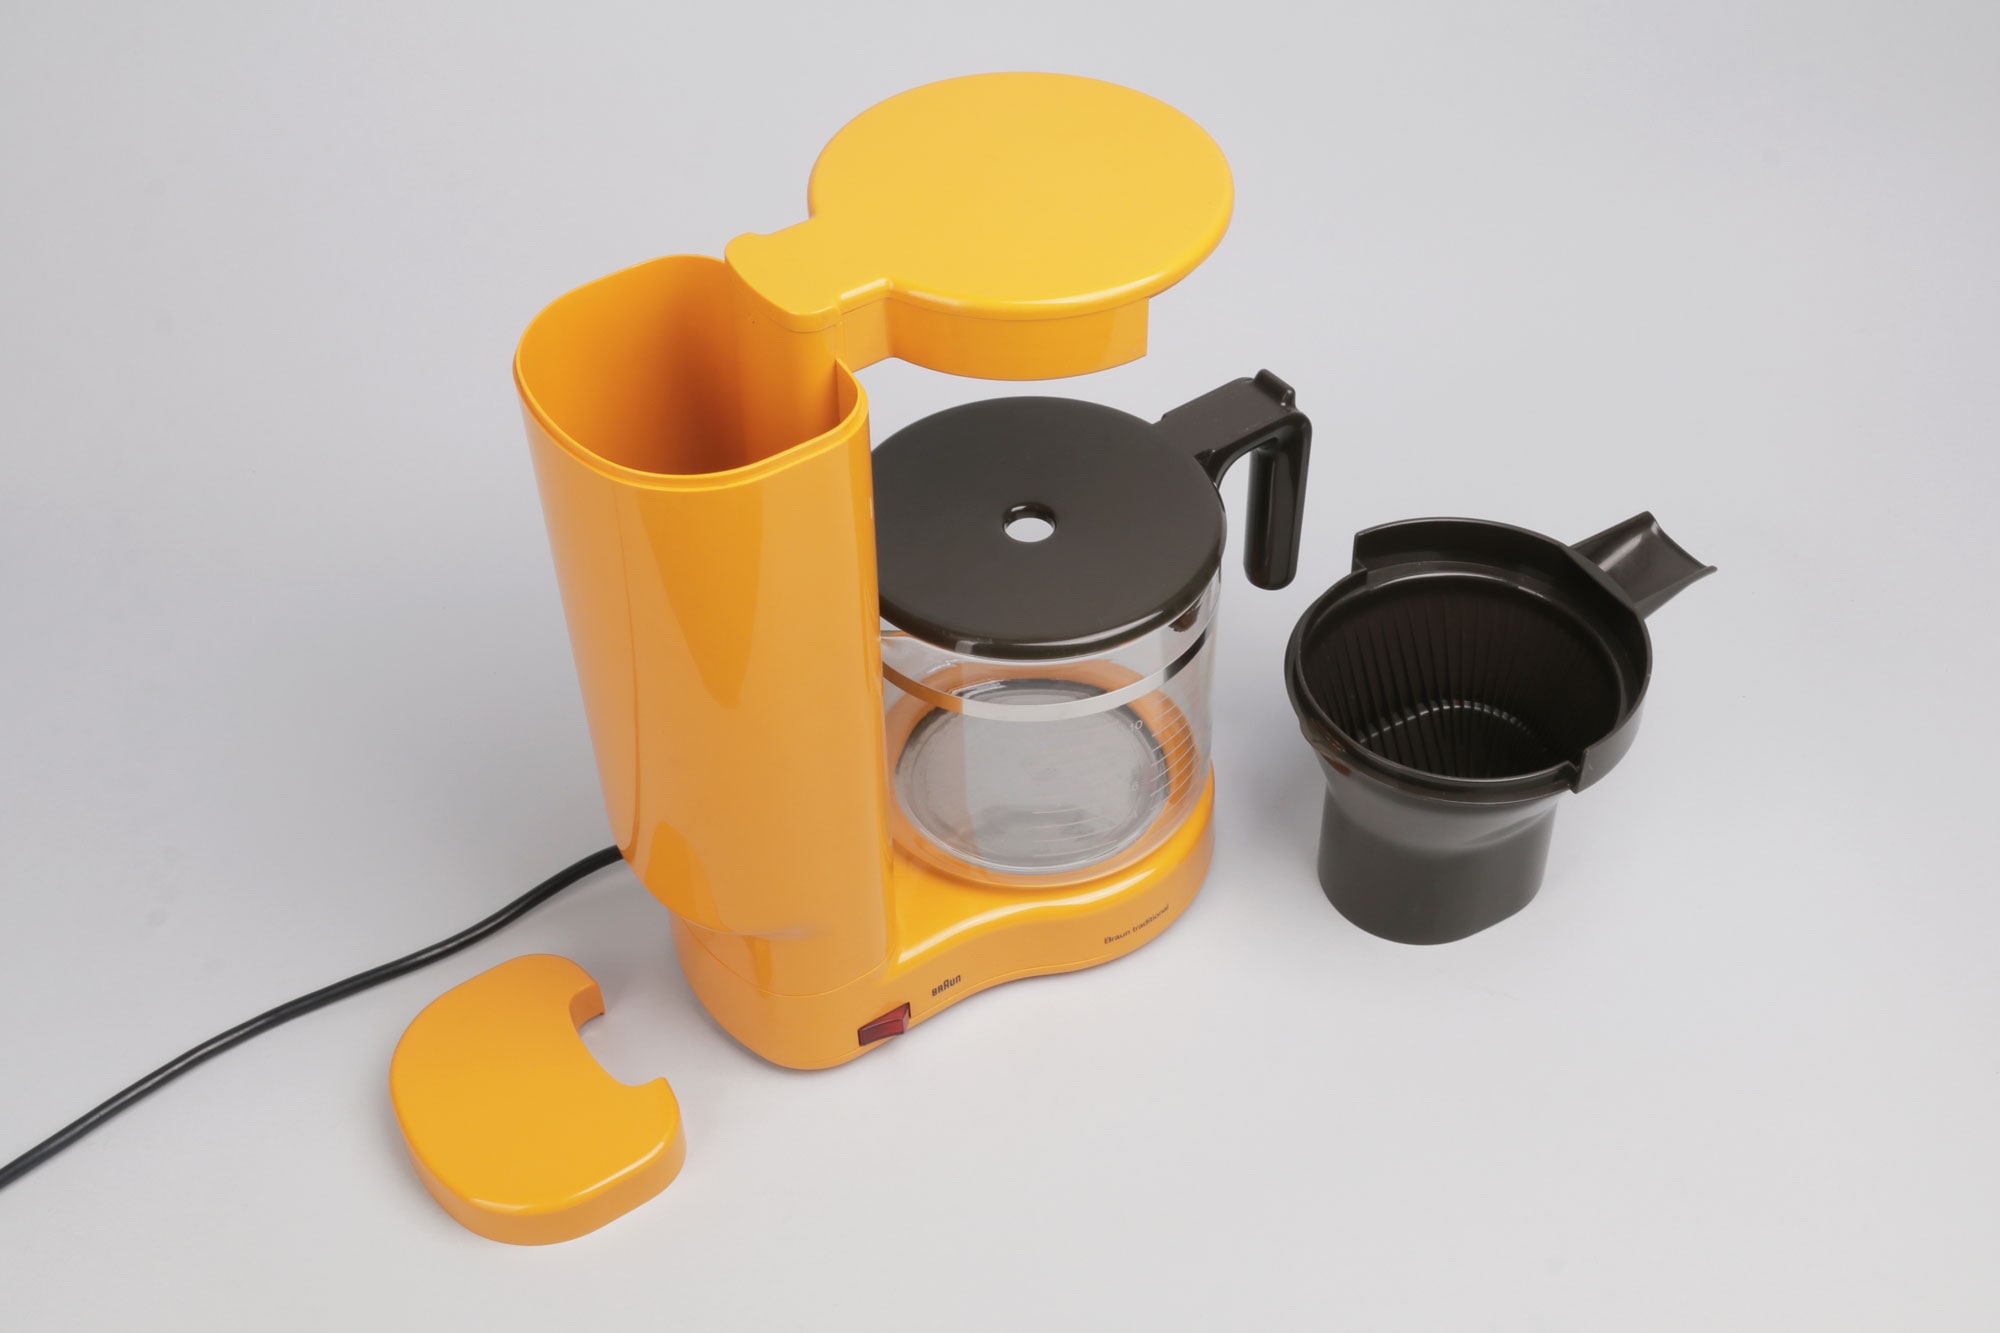 https://onlyonceshop.com/media/pages/product/braun-kf-35-coffee-maker/c786d23bd6-1650541407/yellow-braun-kf-35-coffee-maker-machine-design-h.kahlcke-1978-typ-4053-rams-only-once-shop-2.jpg